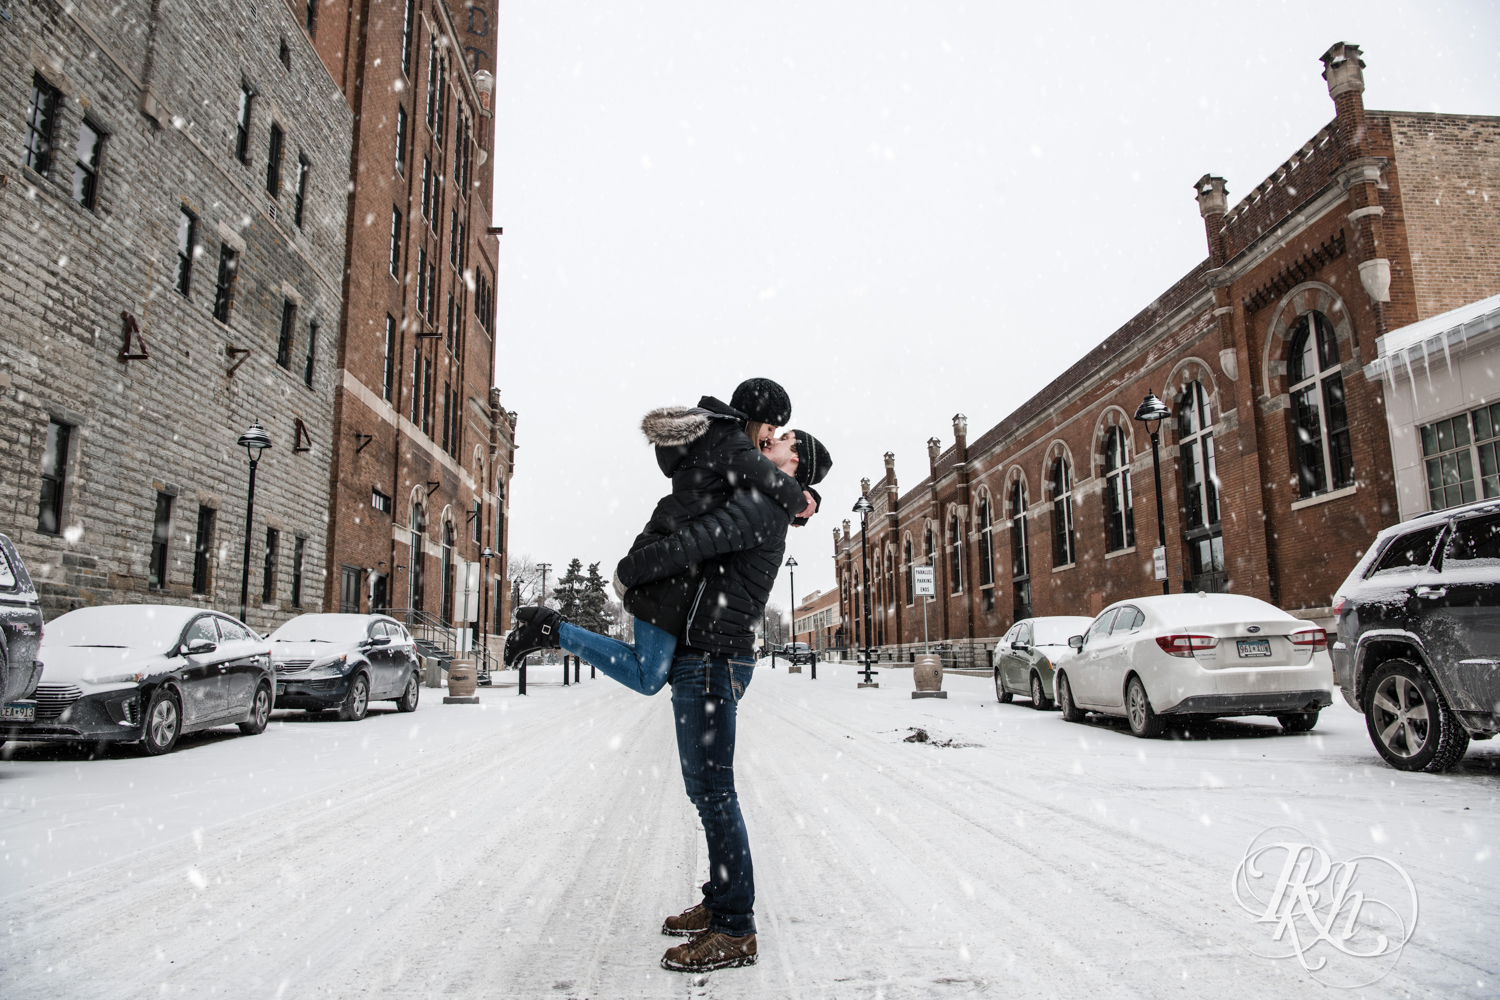 Man and woman kiss in the falling snow during winter engagement photos in Saint Paul, Minnesota.